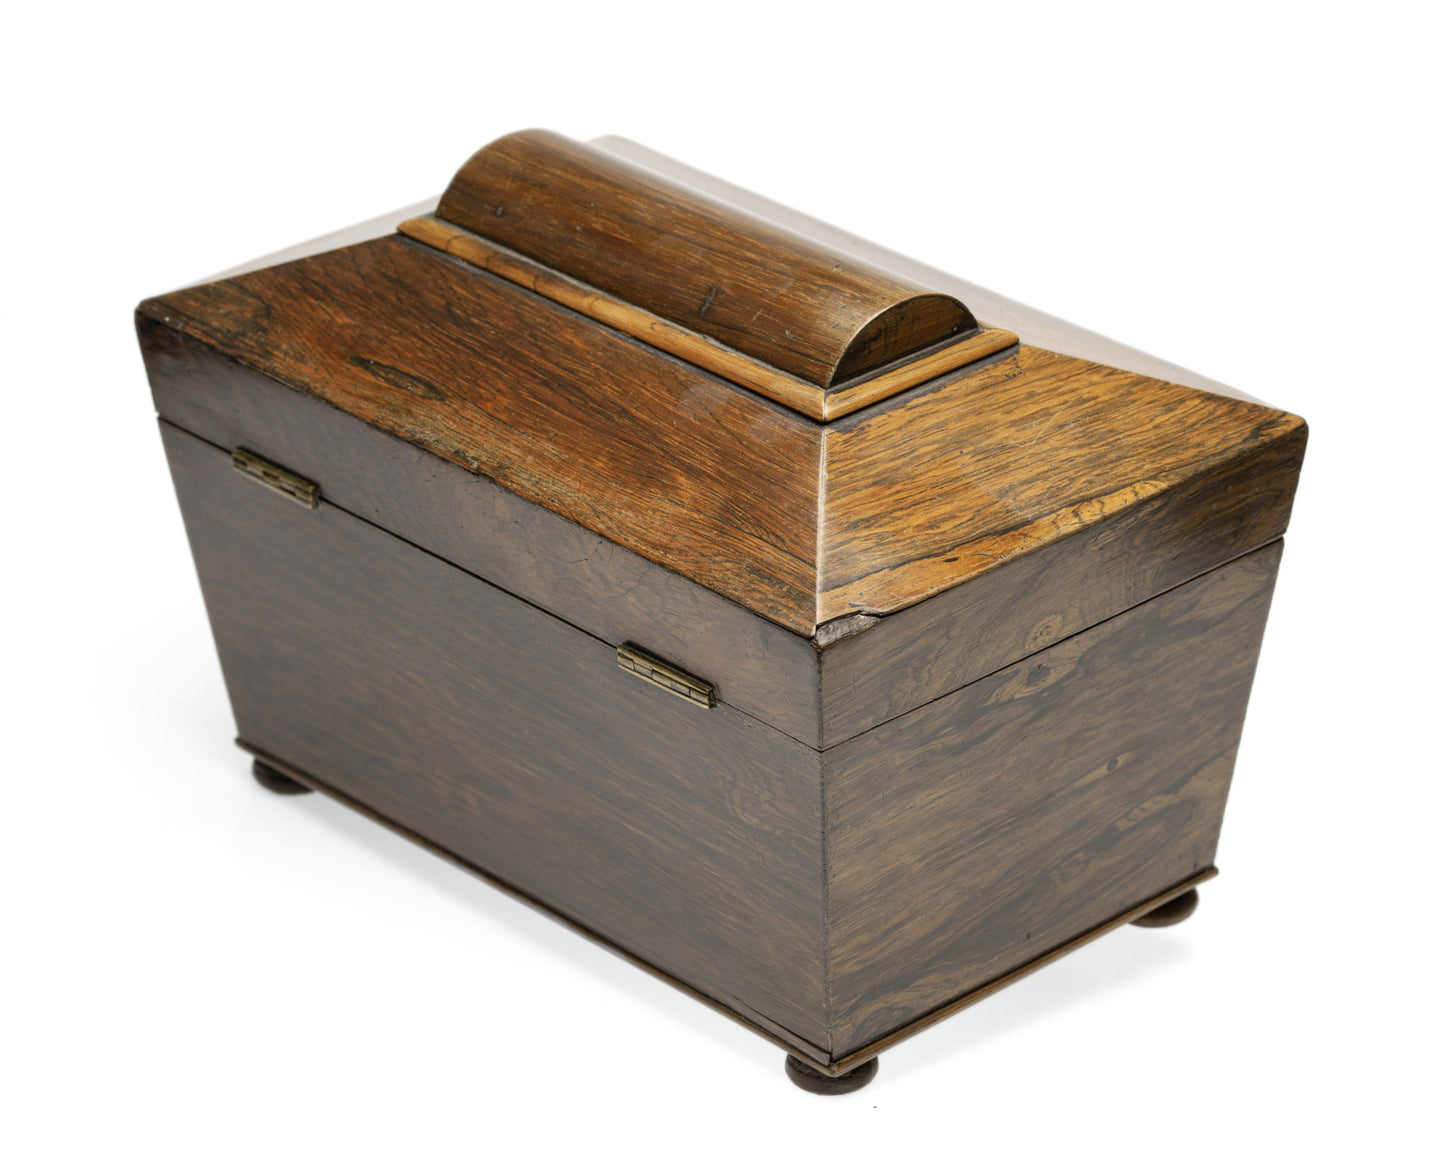 Victorian Antique Wooden Two Division Sarcophagus Tea Caddy with Internal Caddies (Code 2595)